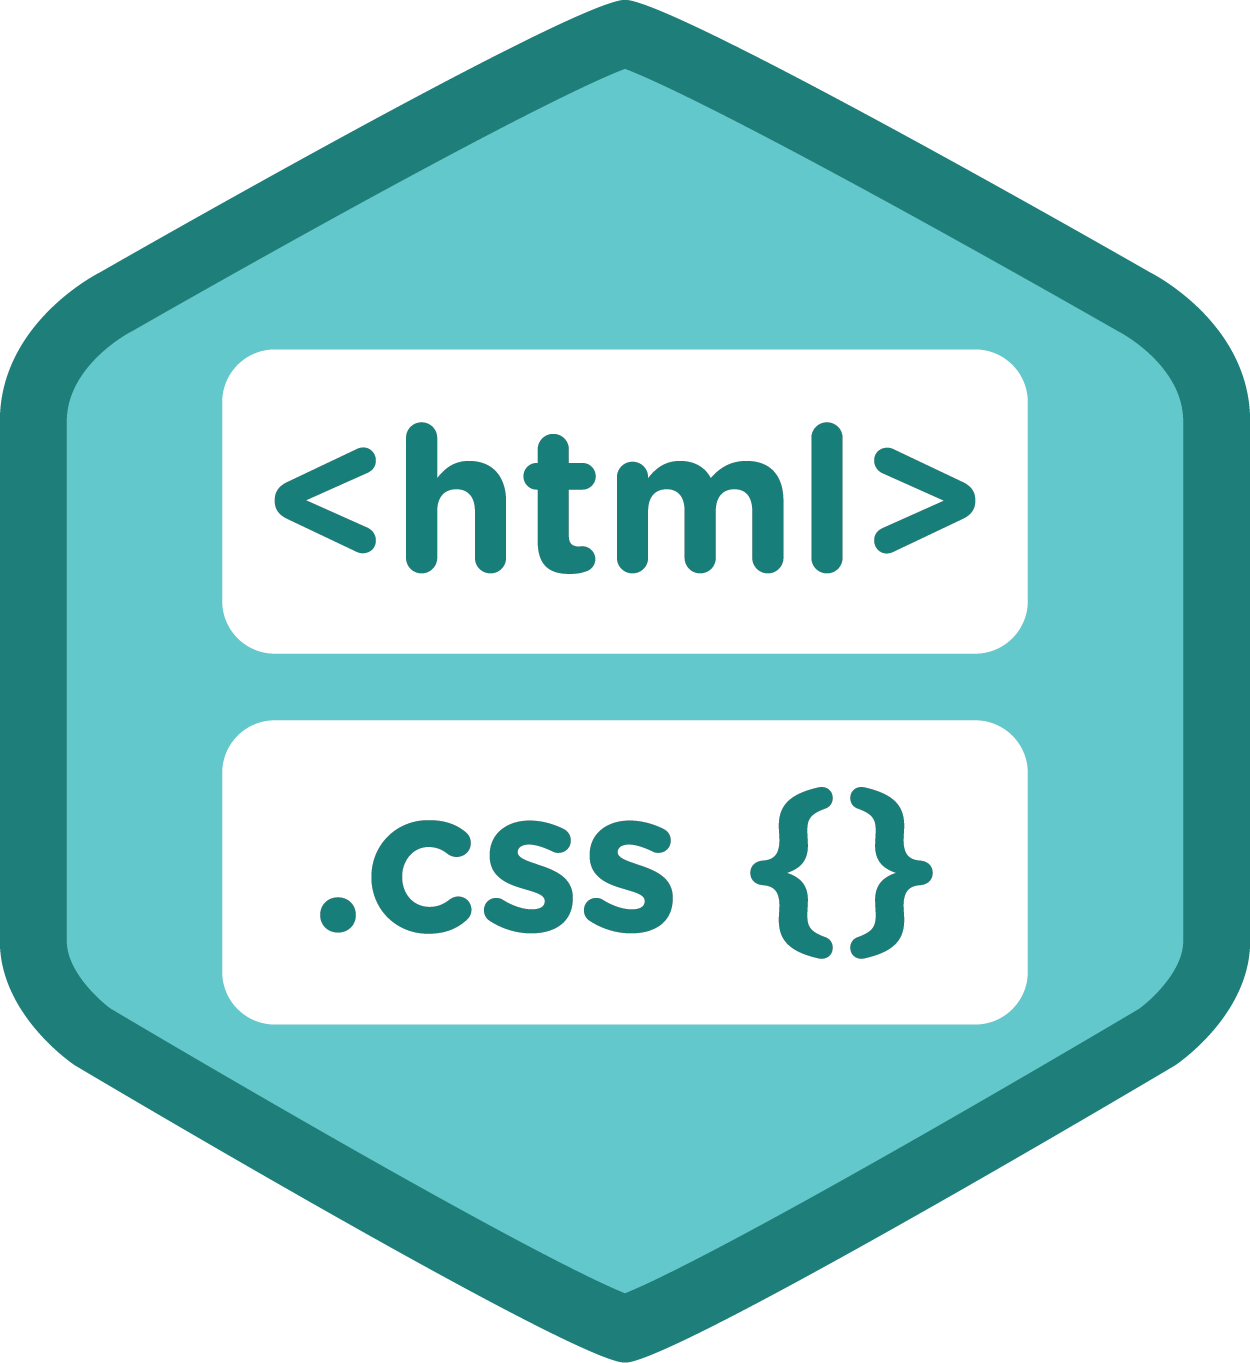 Getting Familiar with HTML and CSS